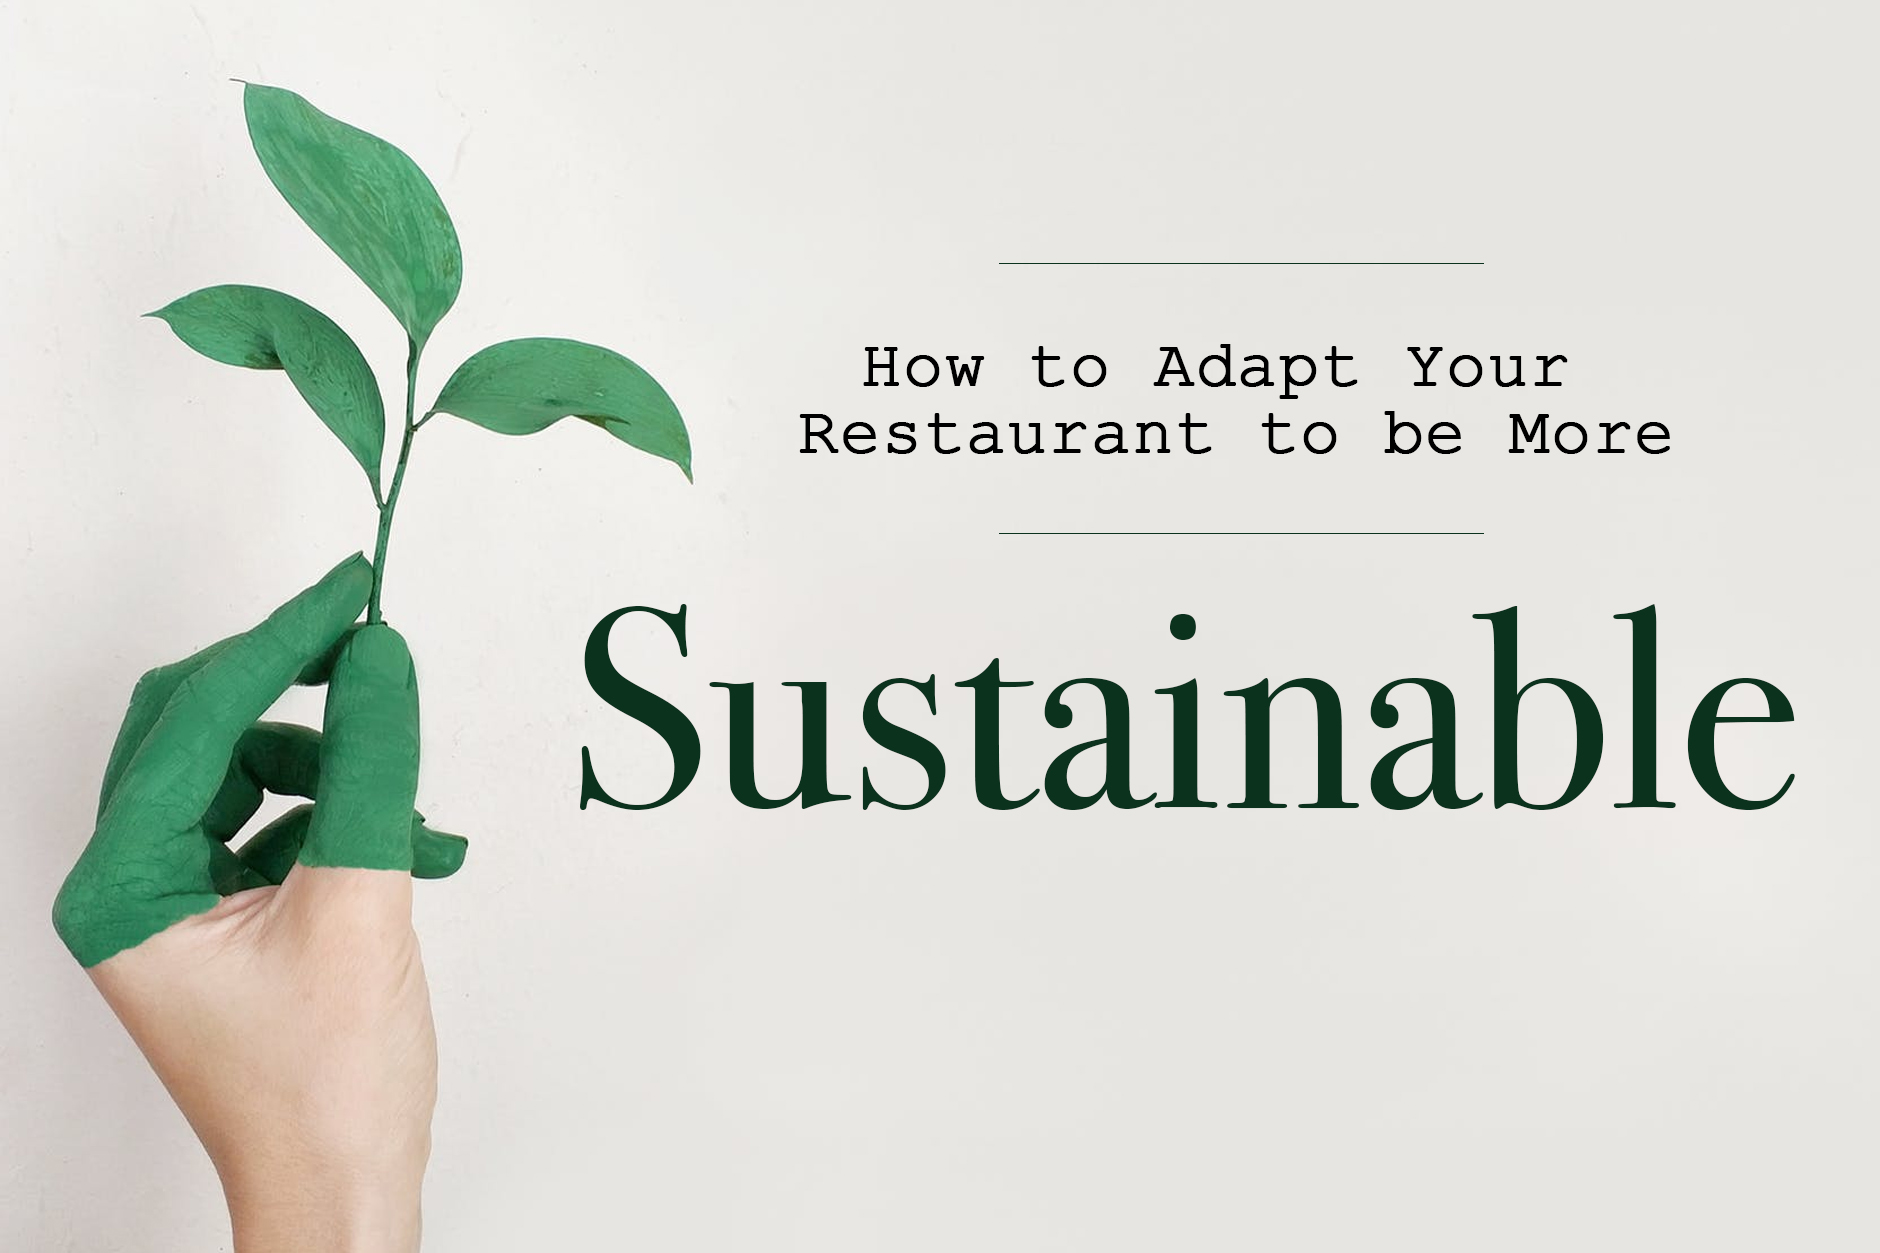 Sustainable Restaurants: Adapt To Be More Sustainable